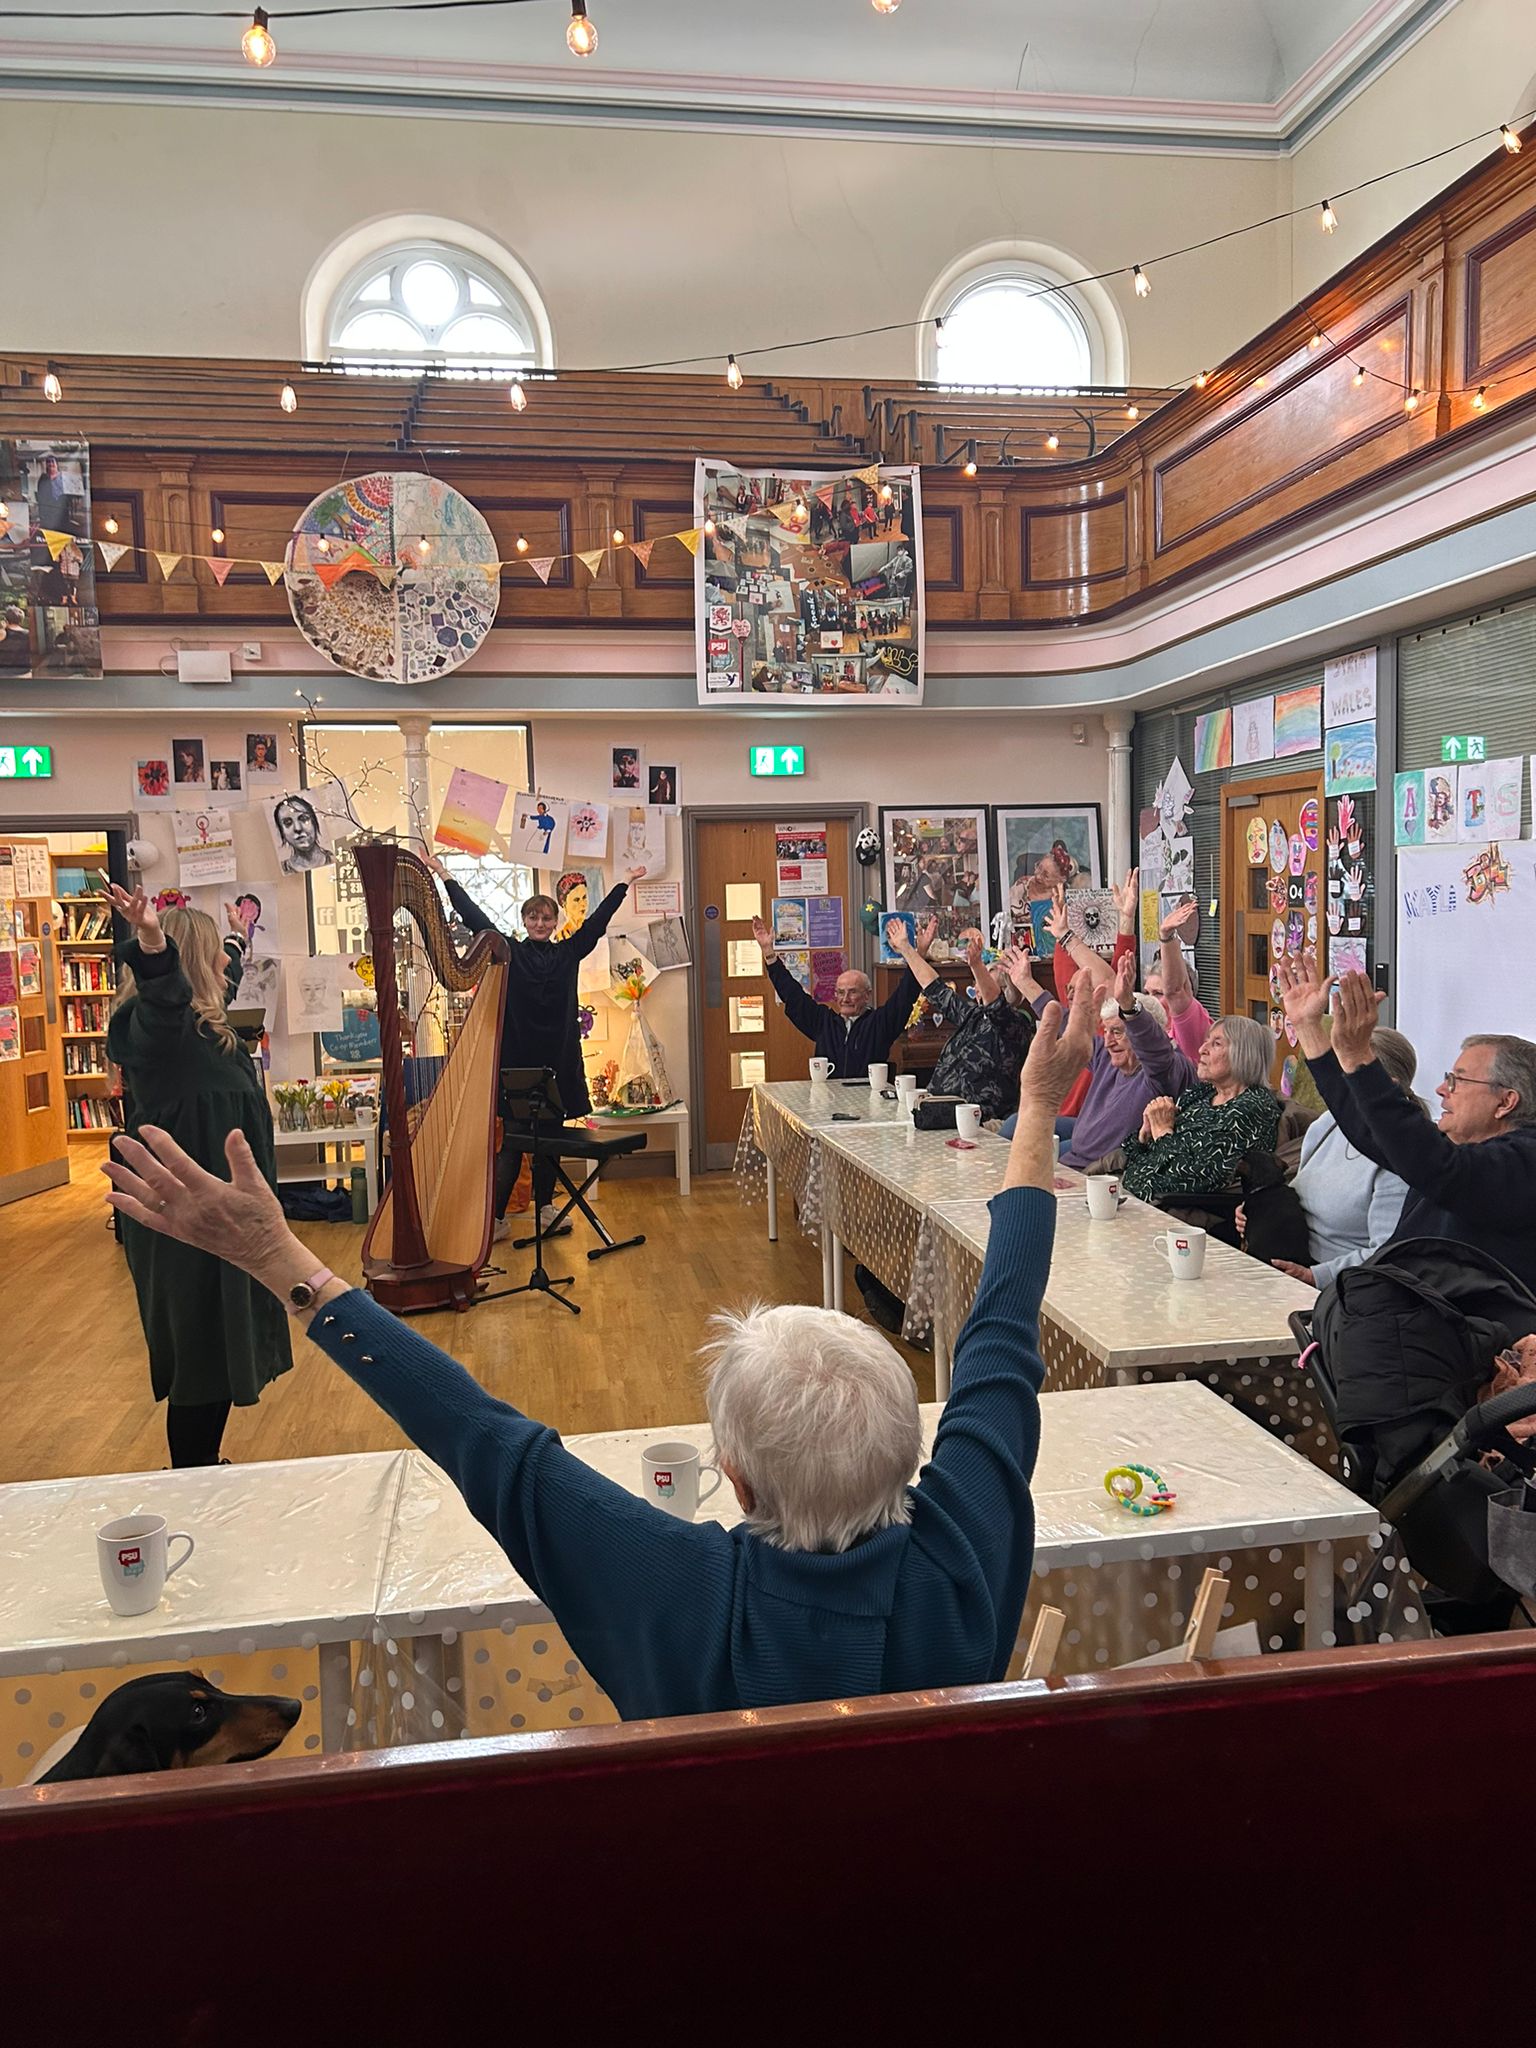 Elevenses Dementia group singing with a harp